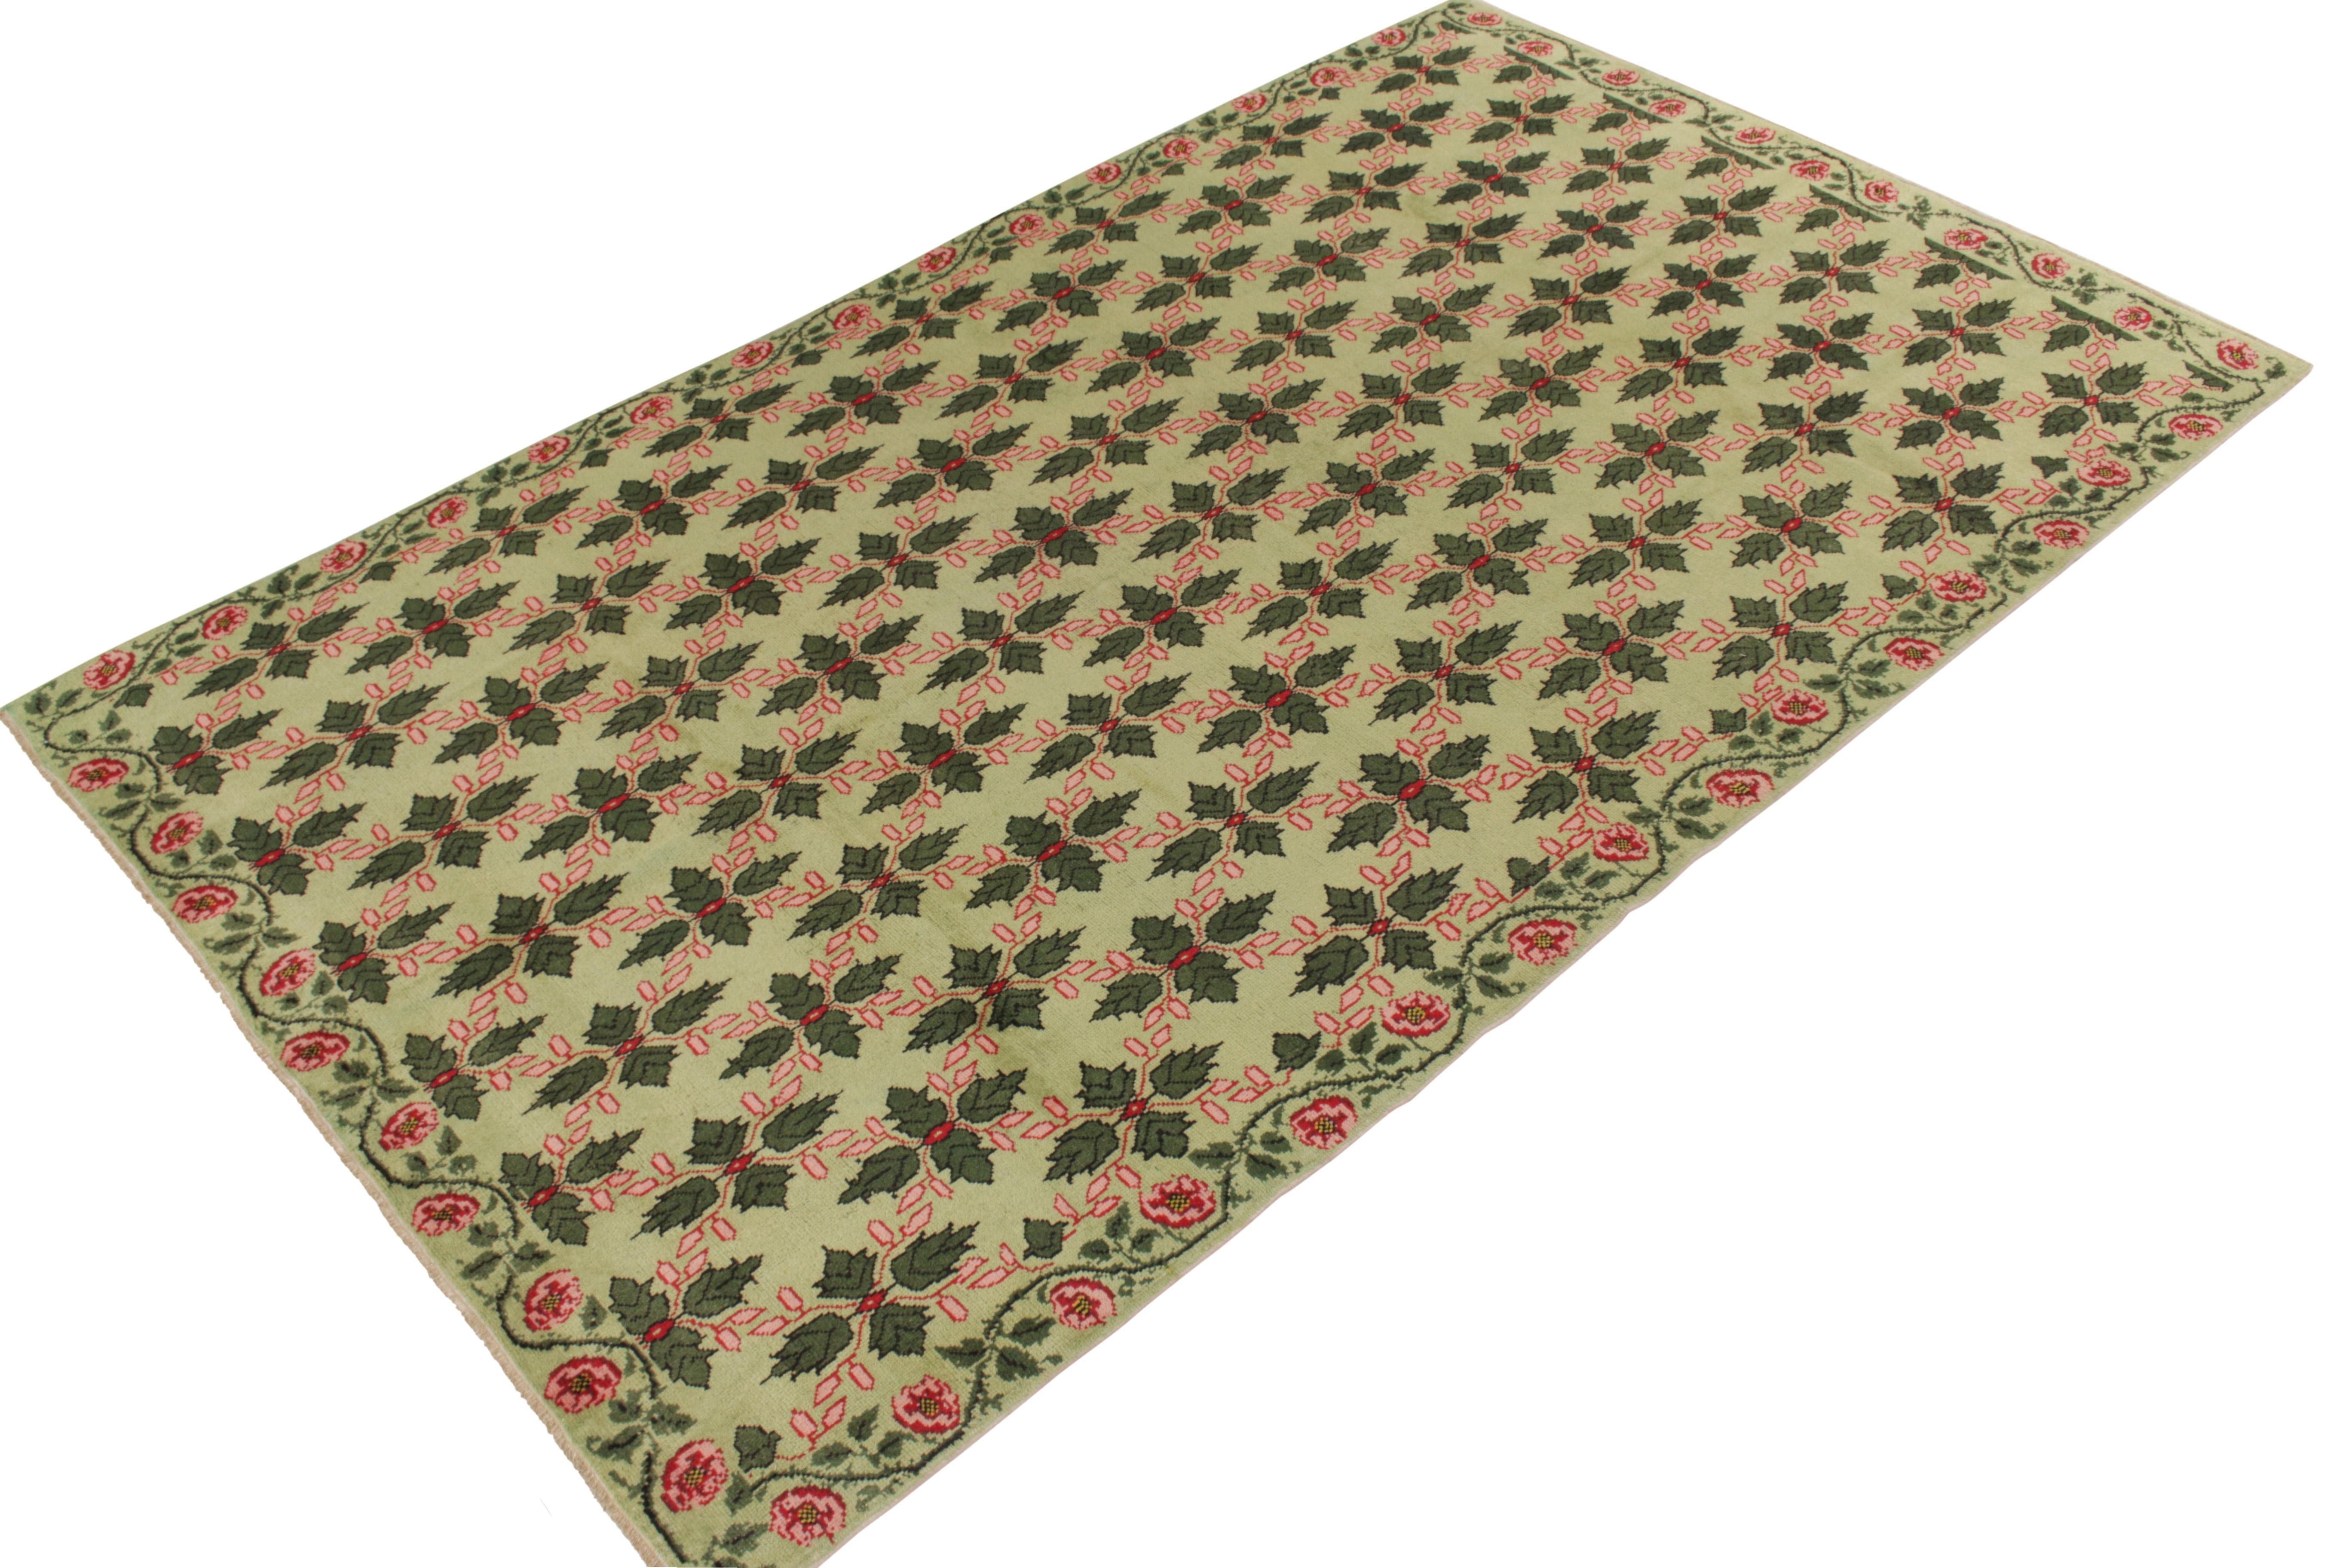 Hand-Knotted 1960s Vintage Art Deco Rug in Green, Pink-Red Floral Pattern by Rug & Kilim For Sale